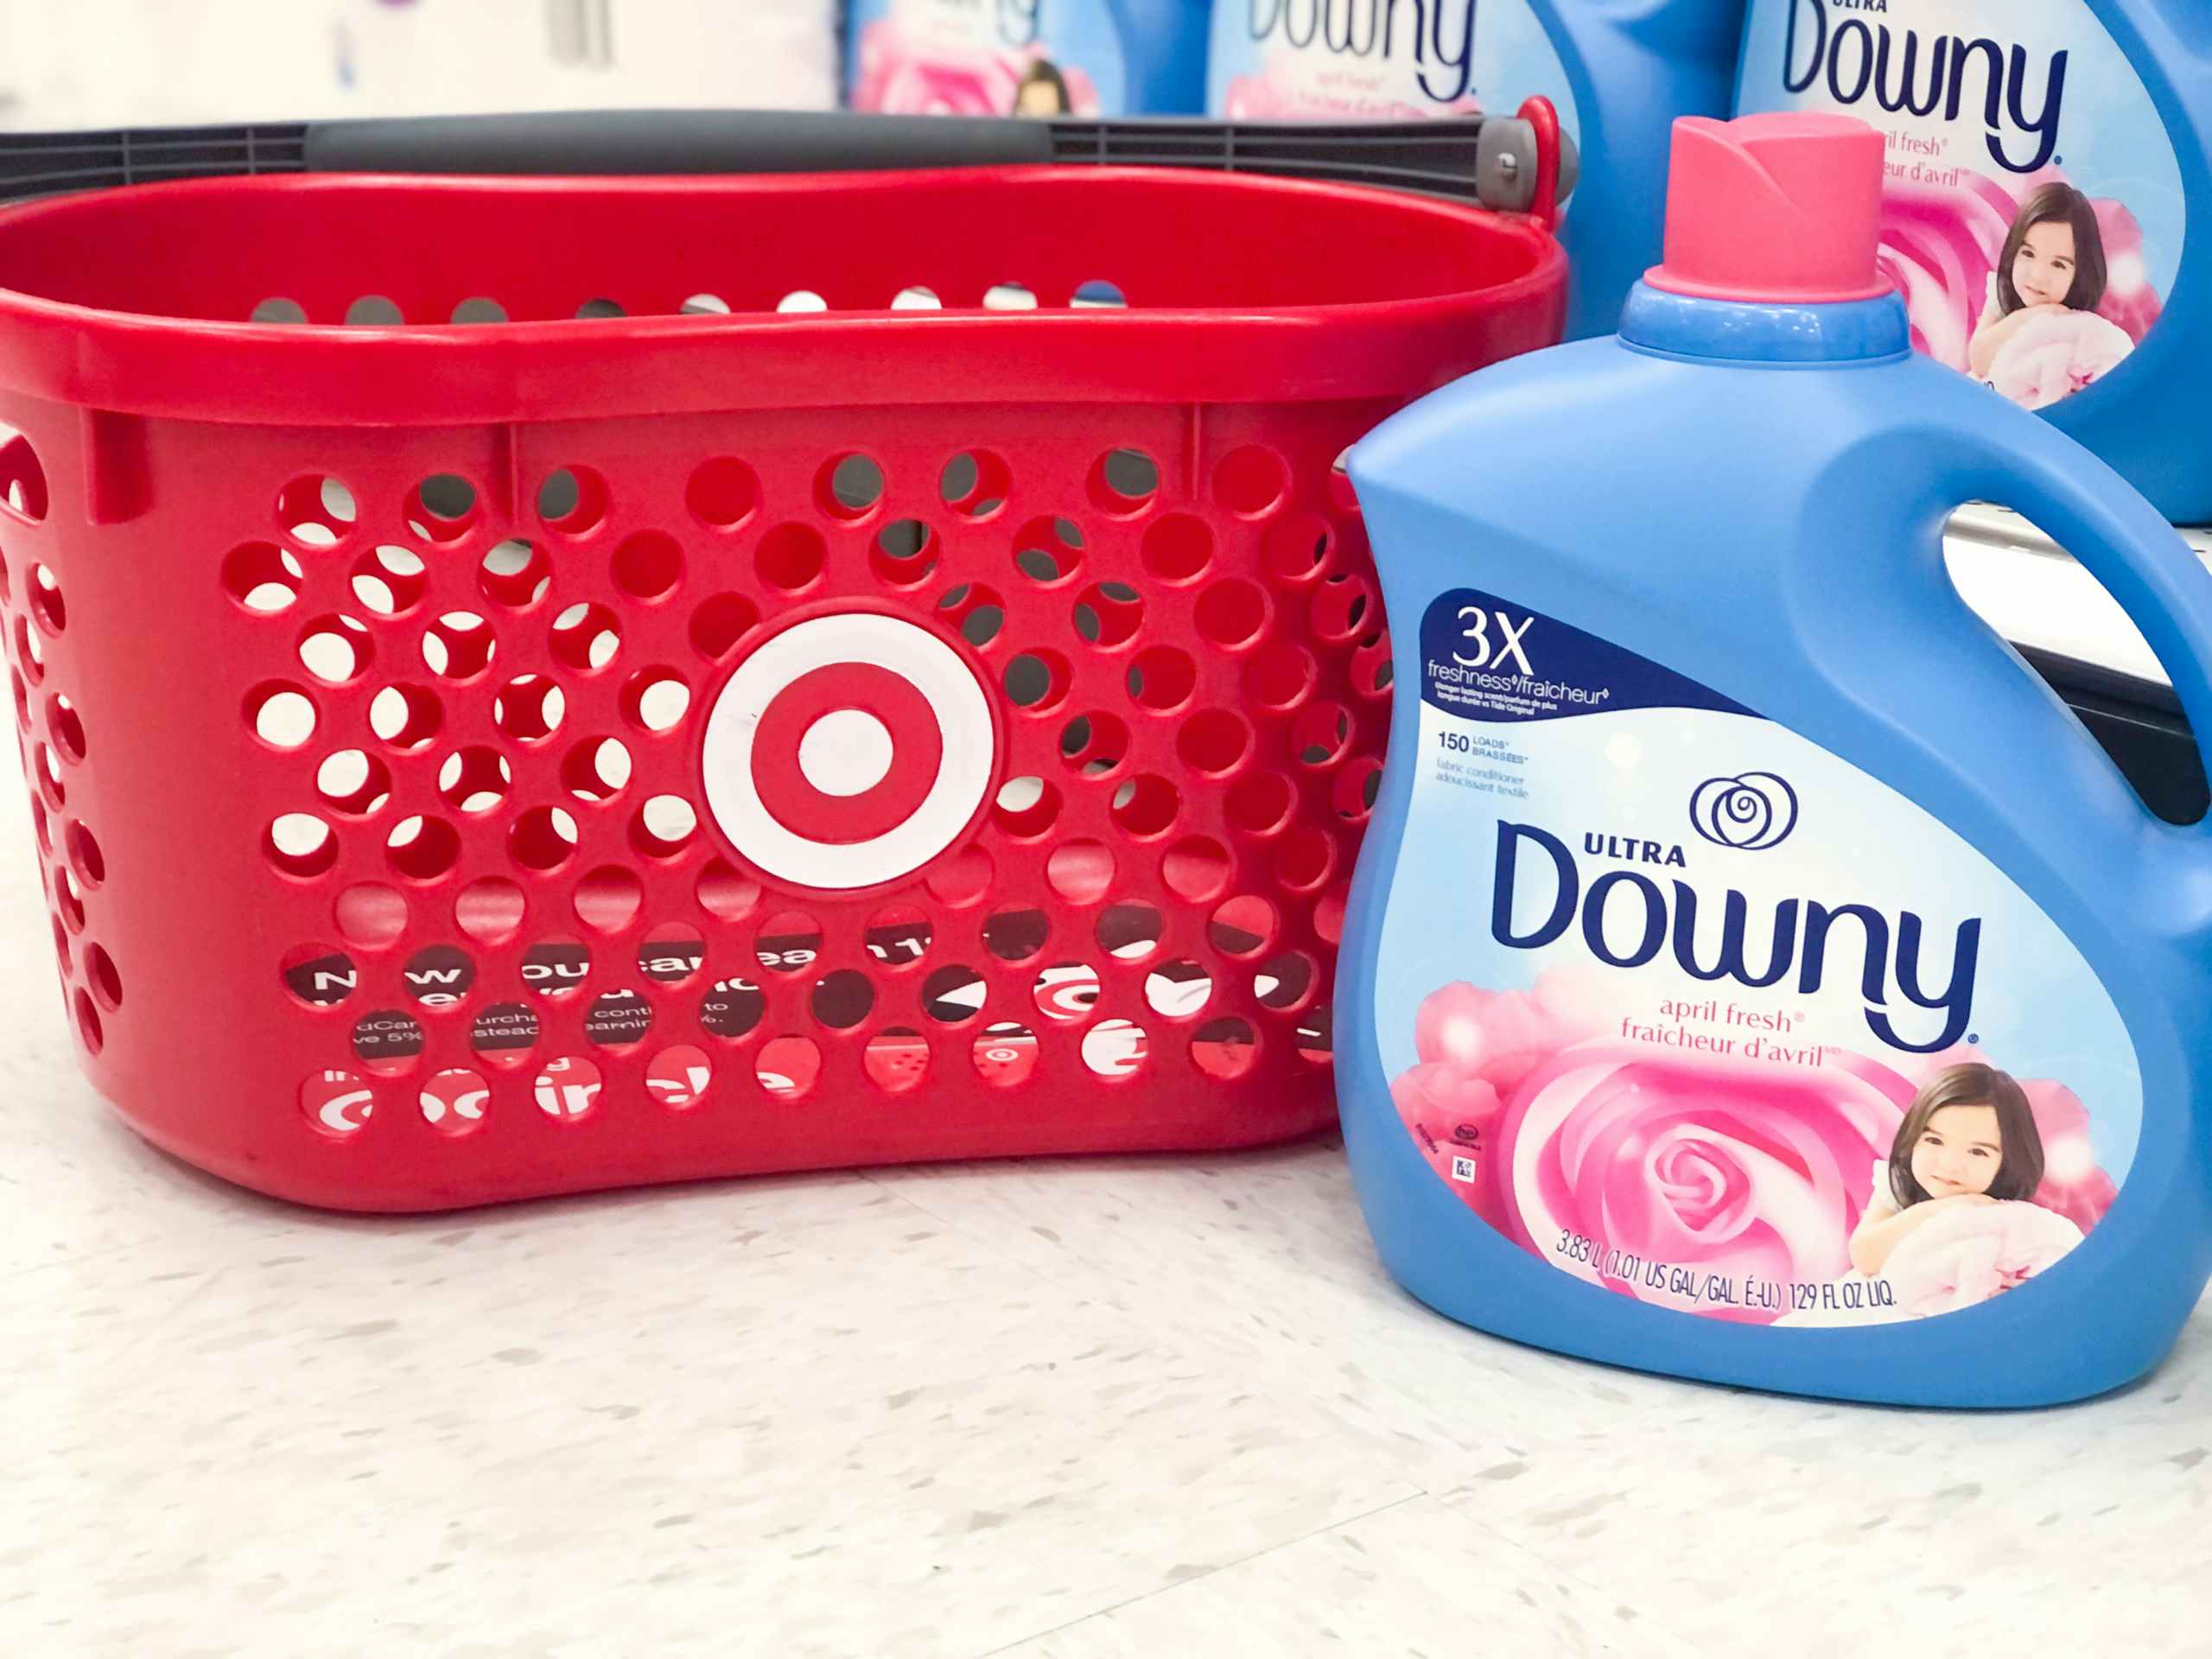 Downy in front of Target shopping basket on the floor